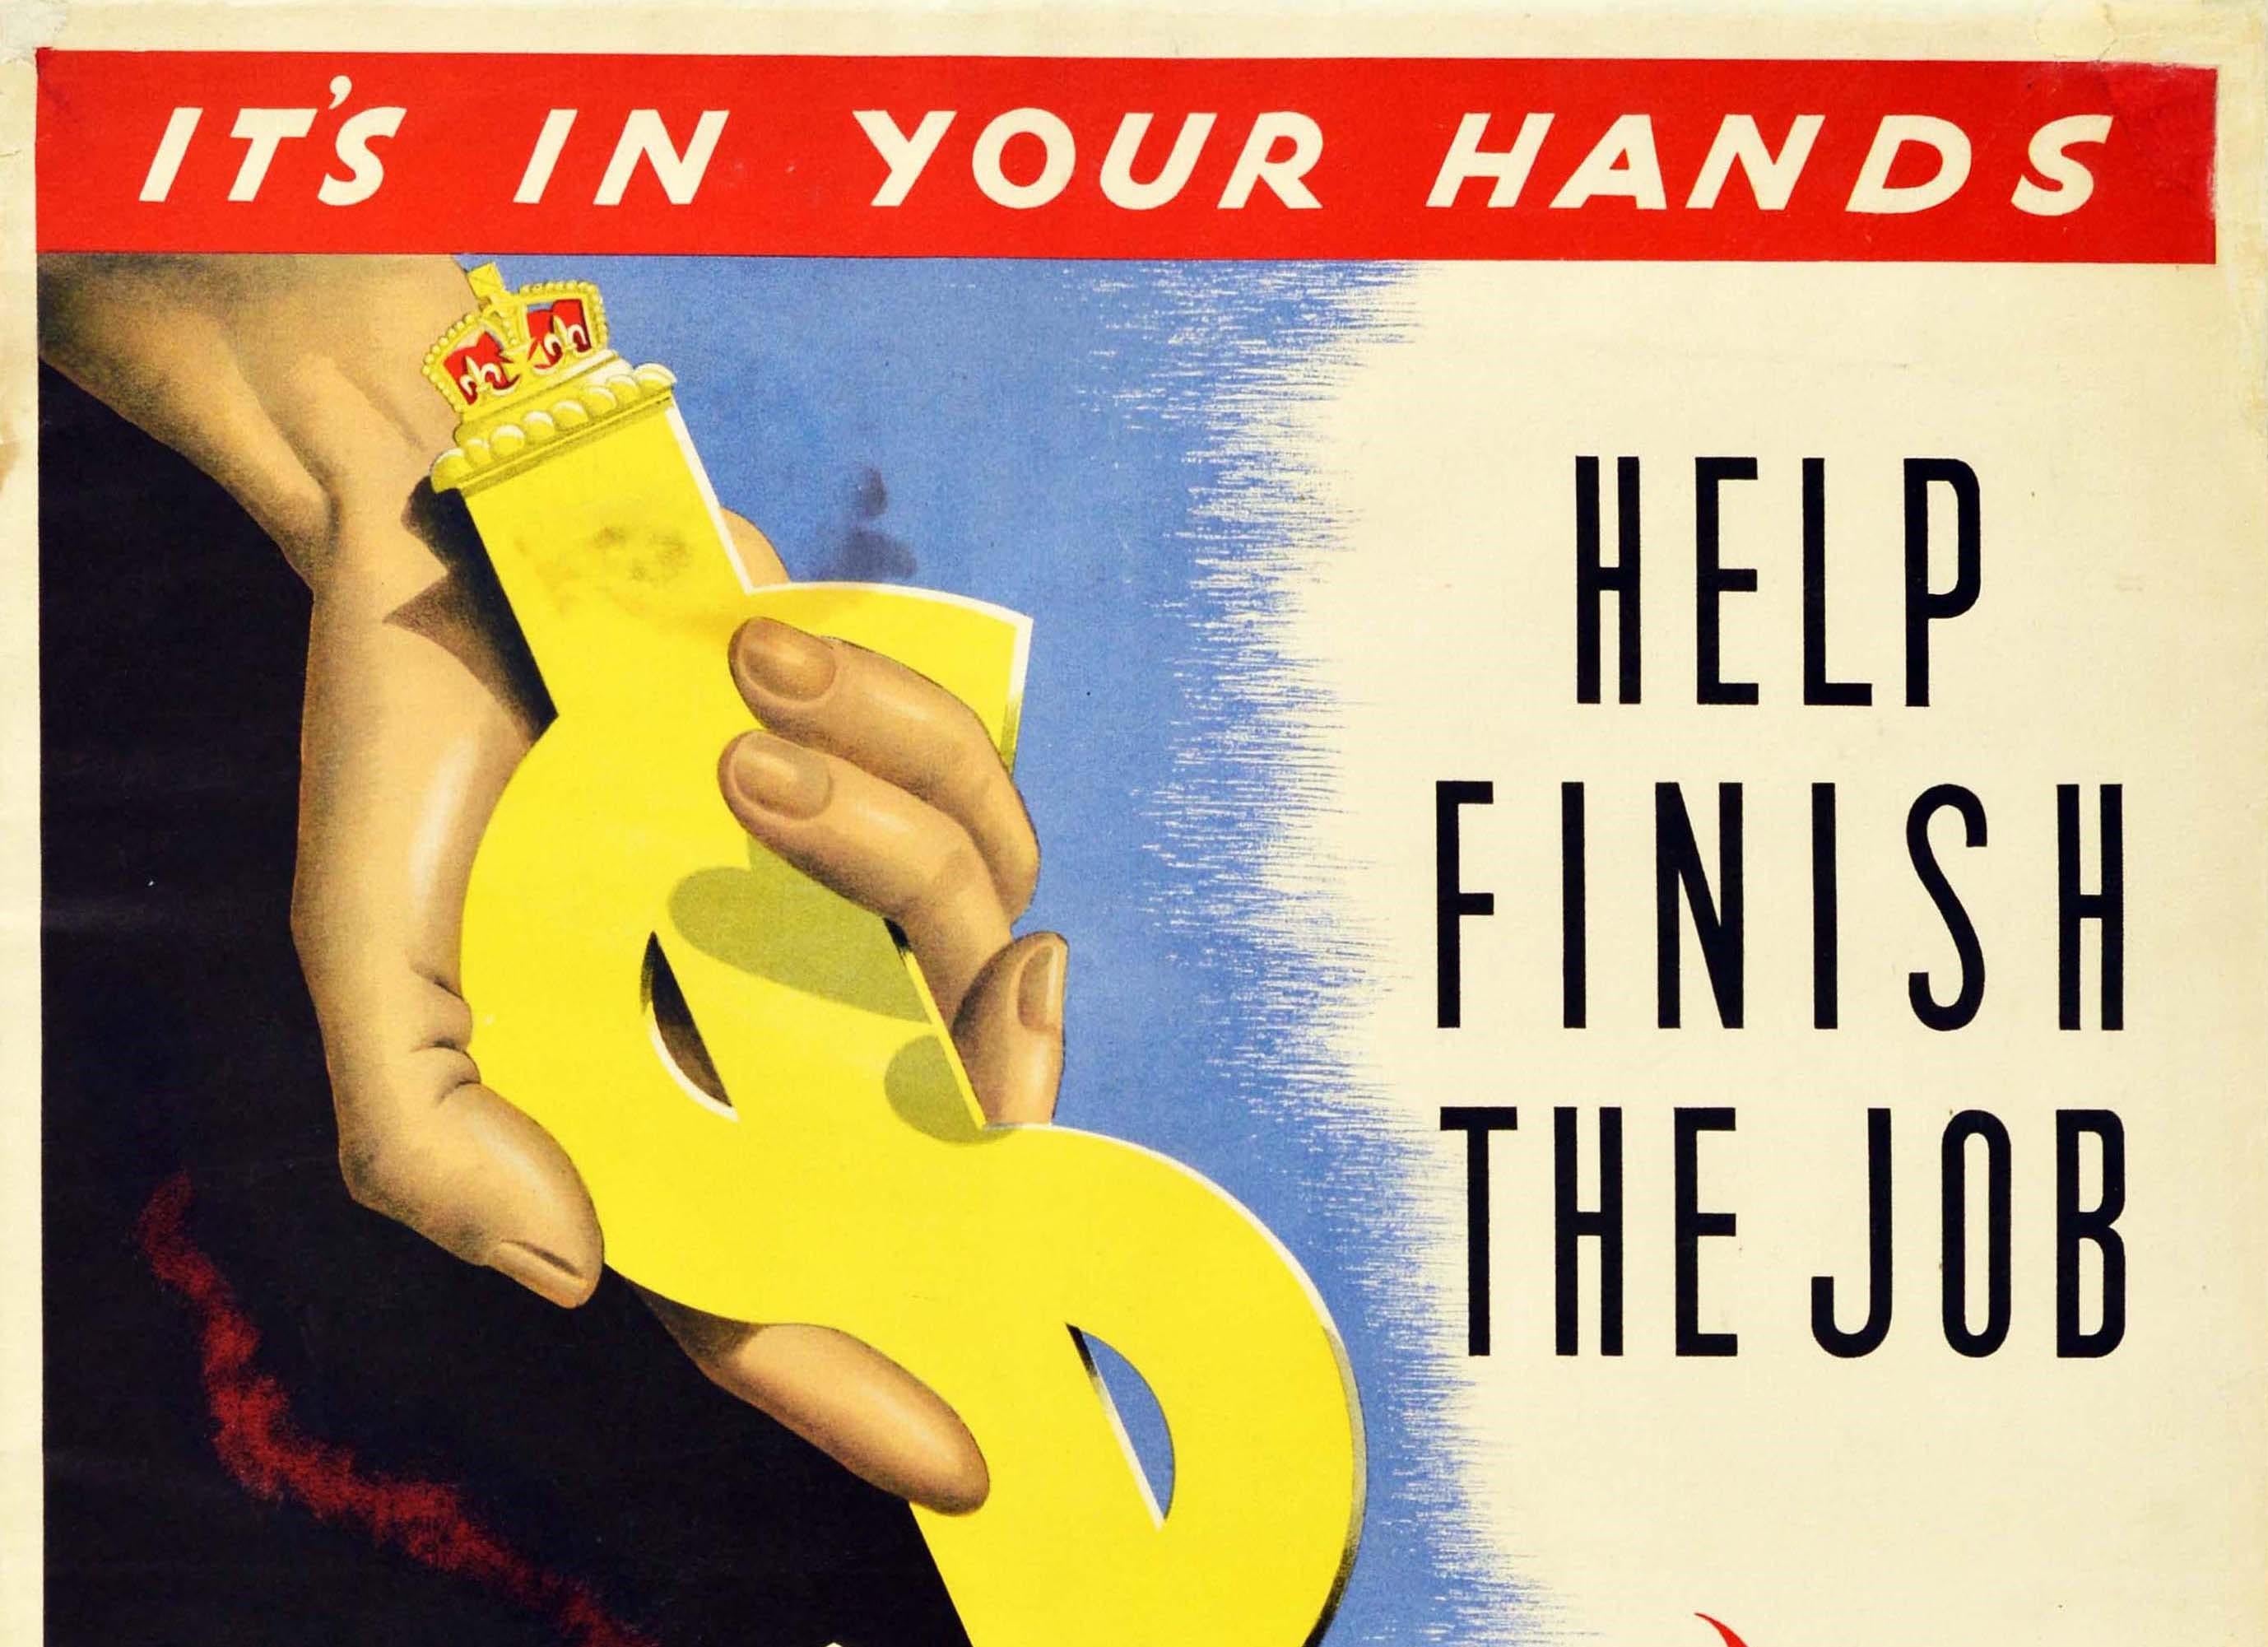 Original vintage World War Two propaganda poster - It's in your hands Help finish the job Buy Victory Bonds - featuring a colourful design depicting a hand holding a crown topped yellow gold $ dollar sign as a sword piercing a green dragon marked